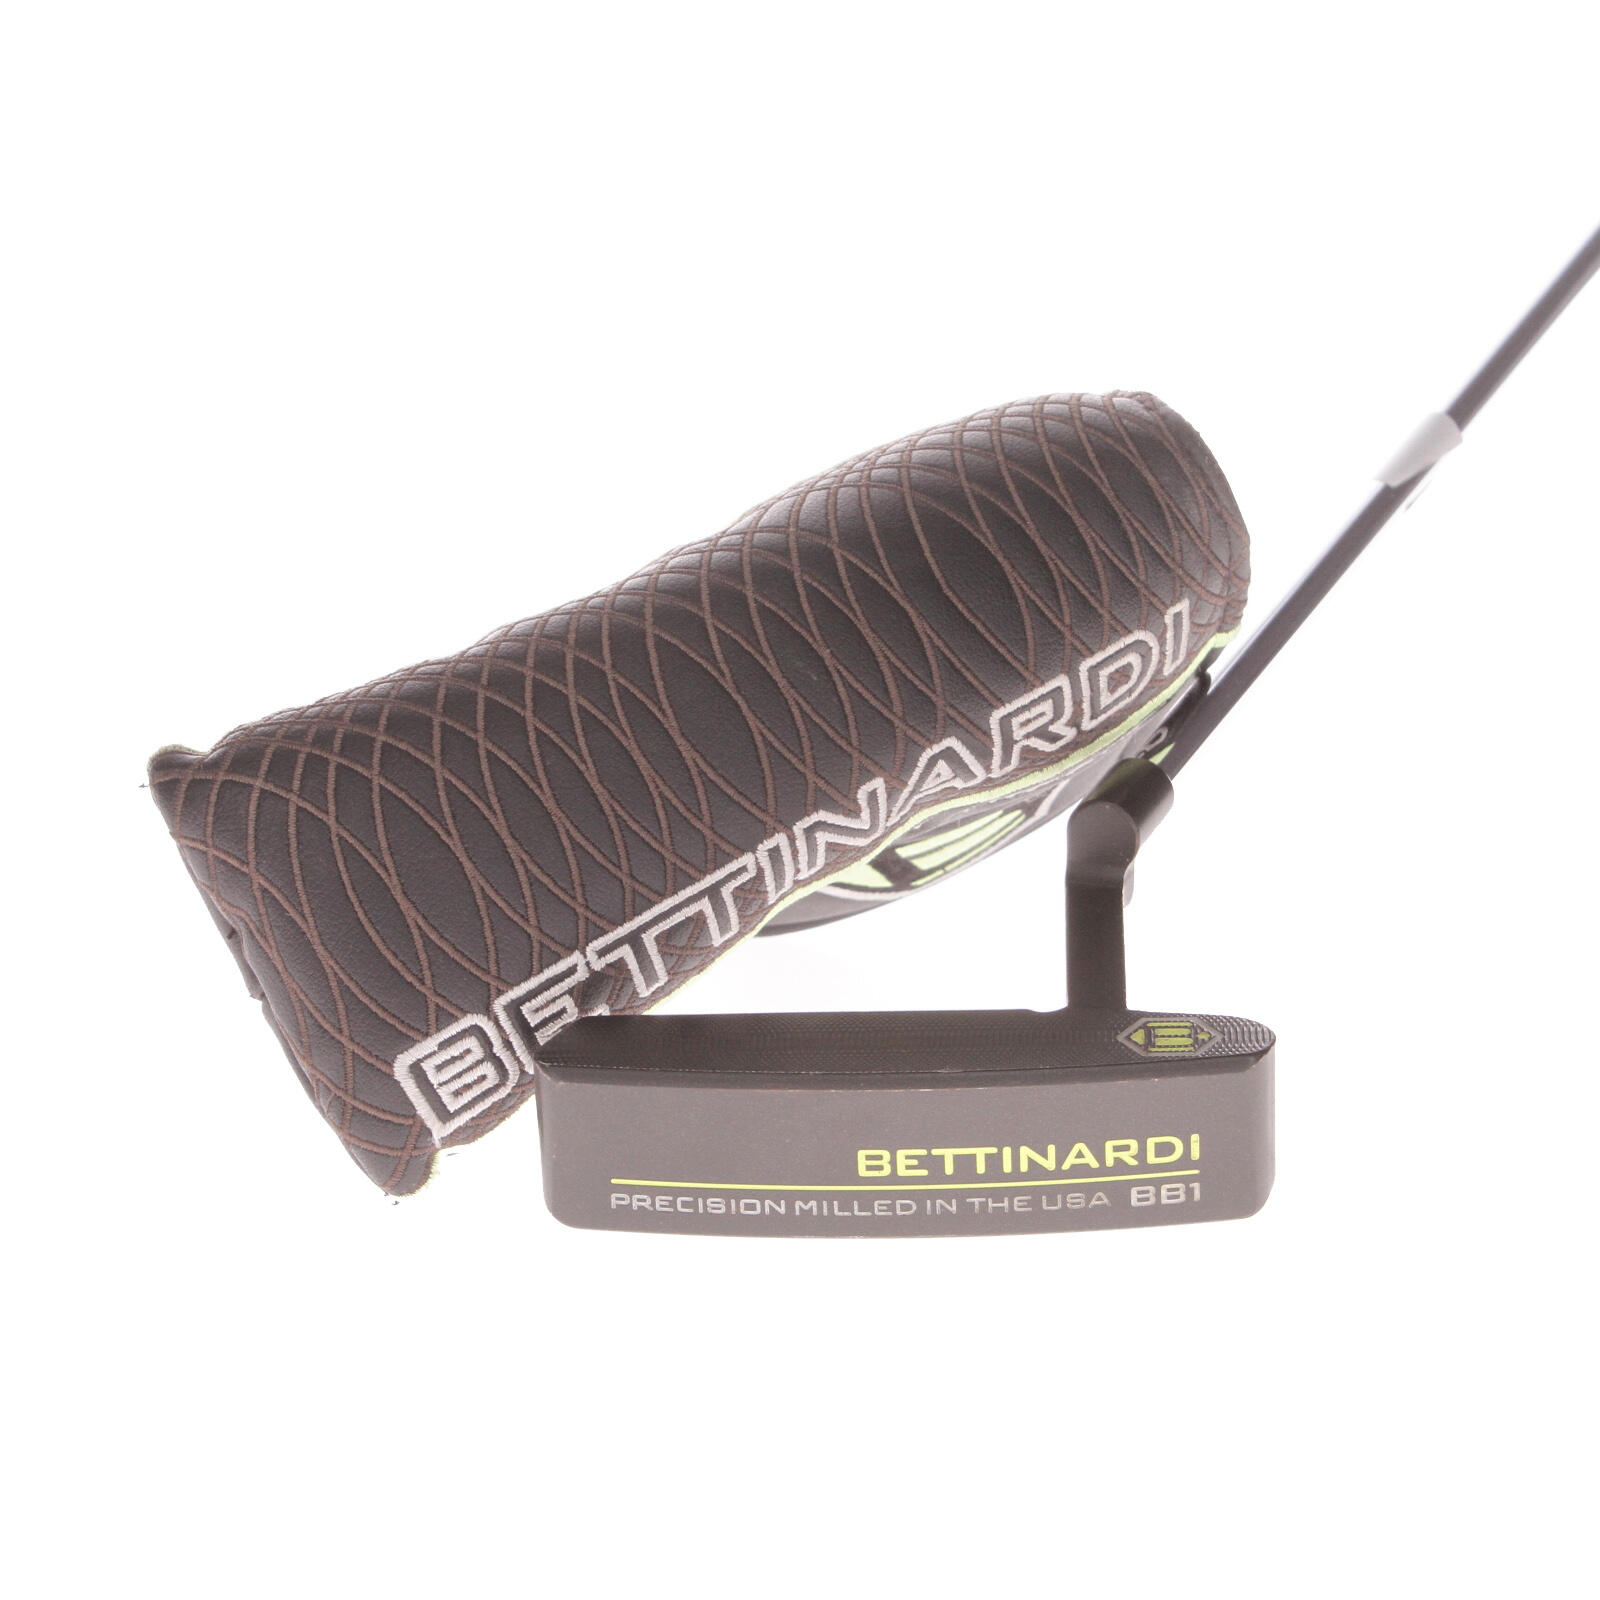 USED - Bettinardi BB1 Putter 33 Inches Length Steel Shaft Right Handed - GRADE B 1/7